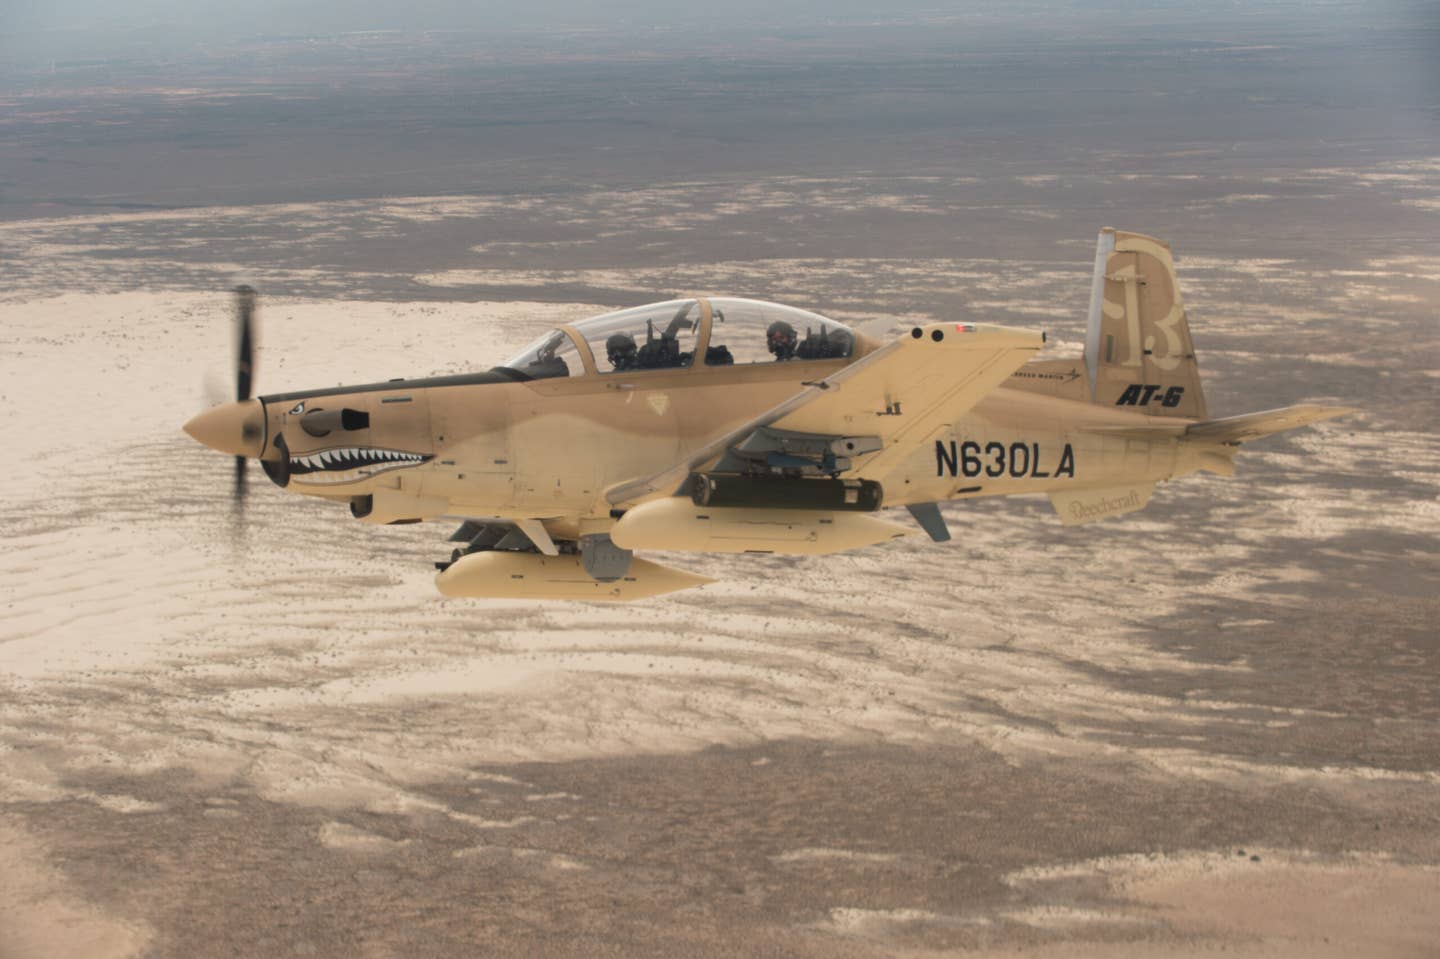 A Beechcraft AT-6 experimental aircraft flies over White Sands Missile Range during the second phase of the Light Attack Experiment in July 2017. <em>U.S. Air Force Photo by Ethan D. Wagner</em>